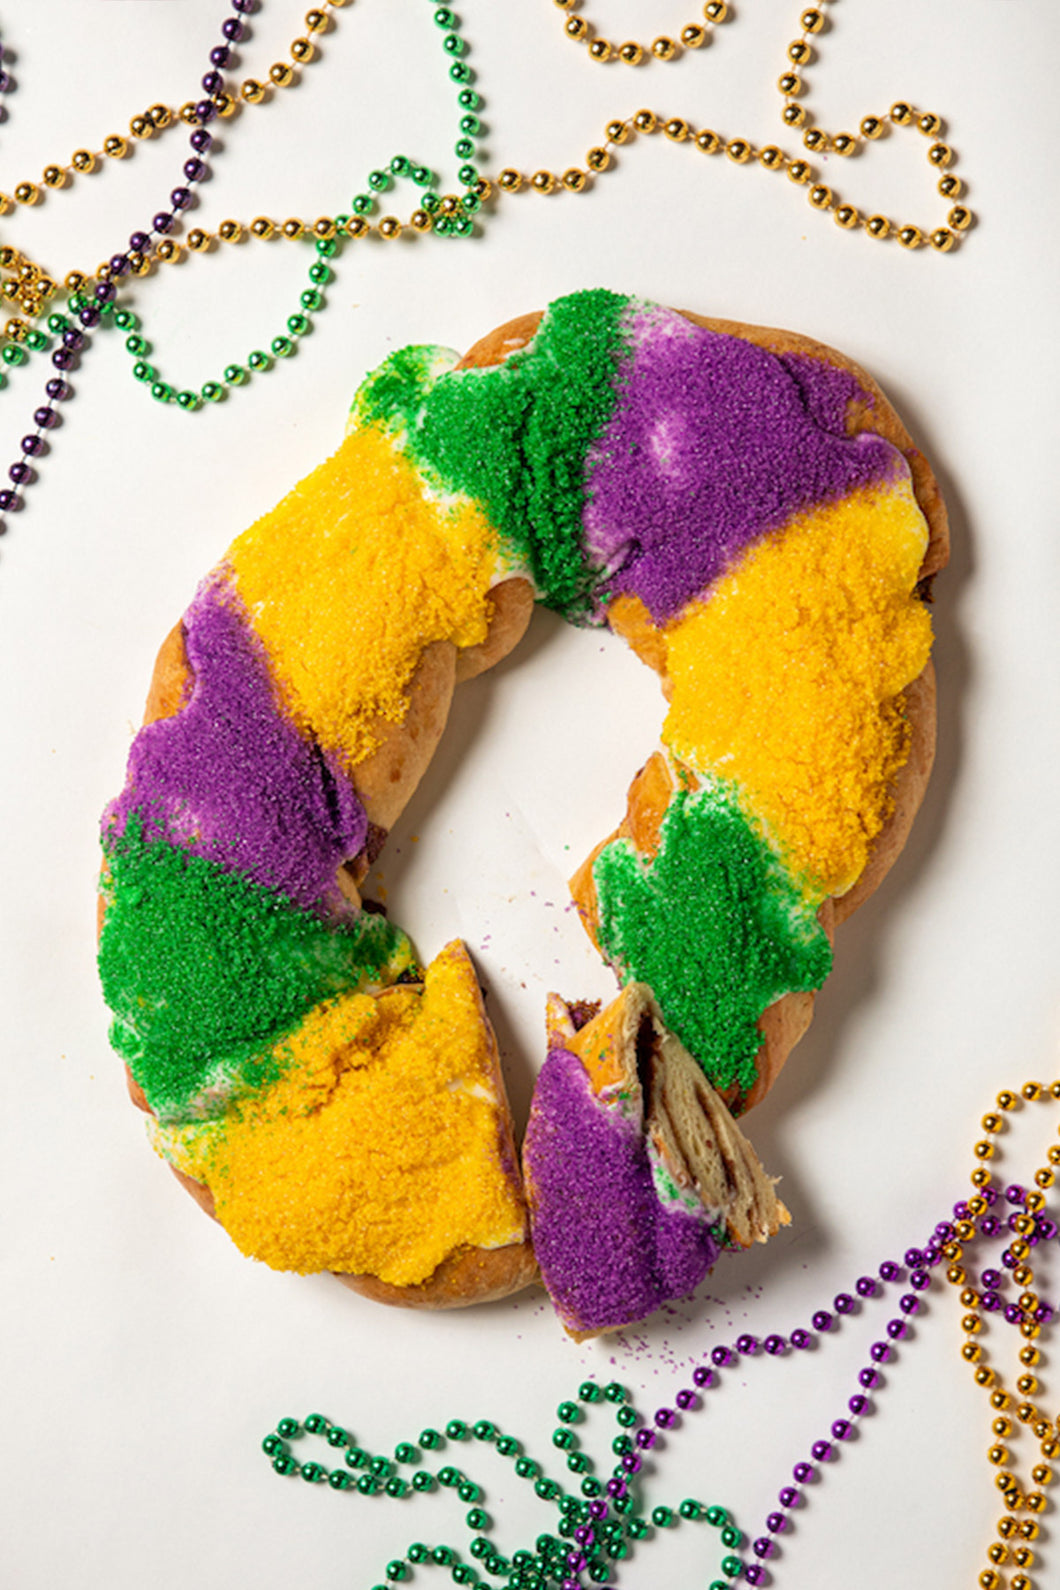 Traditional King Cake - Shipped